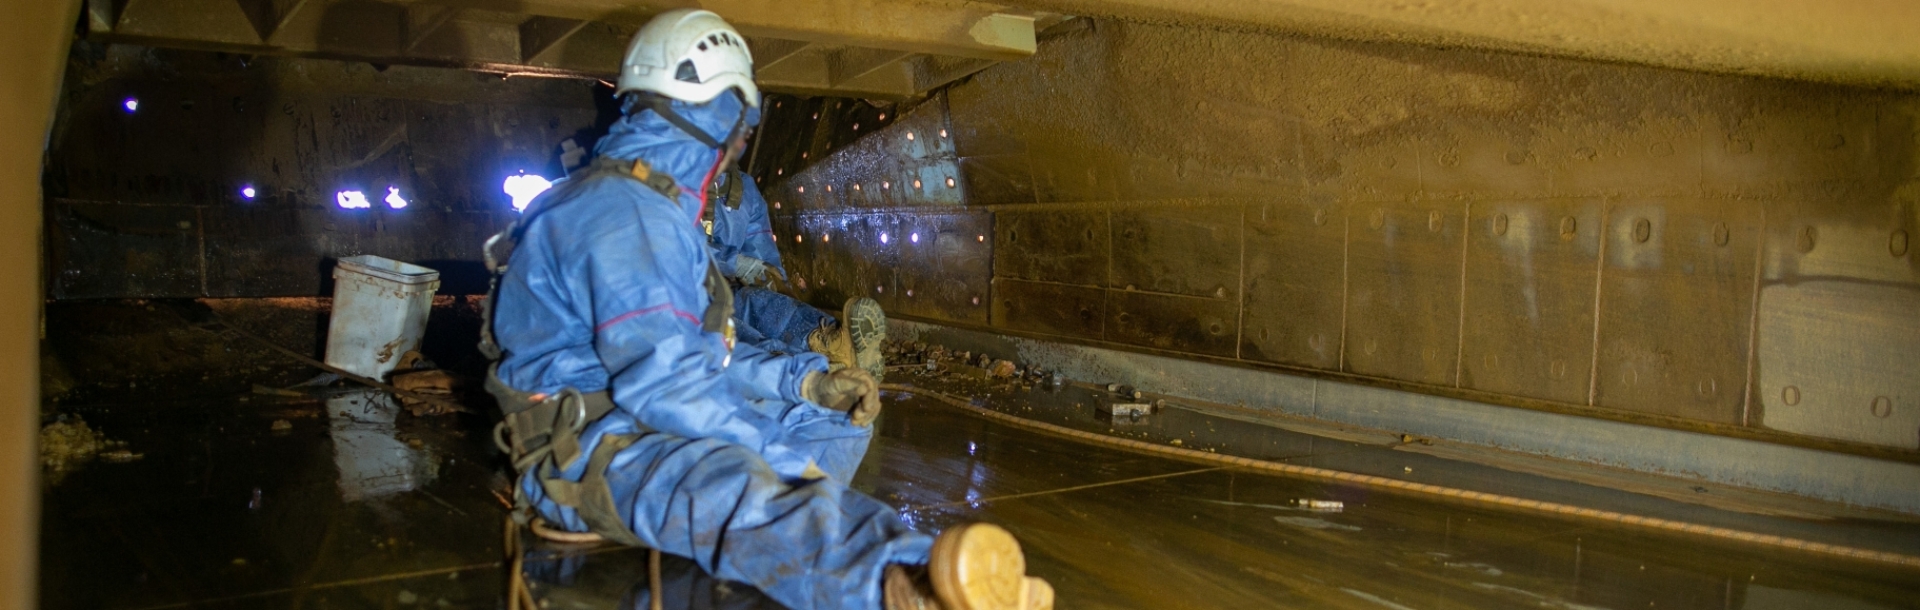 Working In Confined Spaces - All You Need to Know